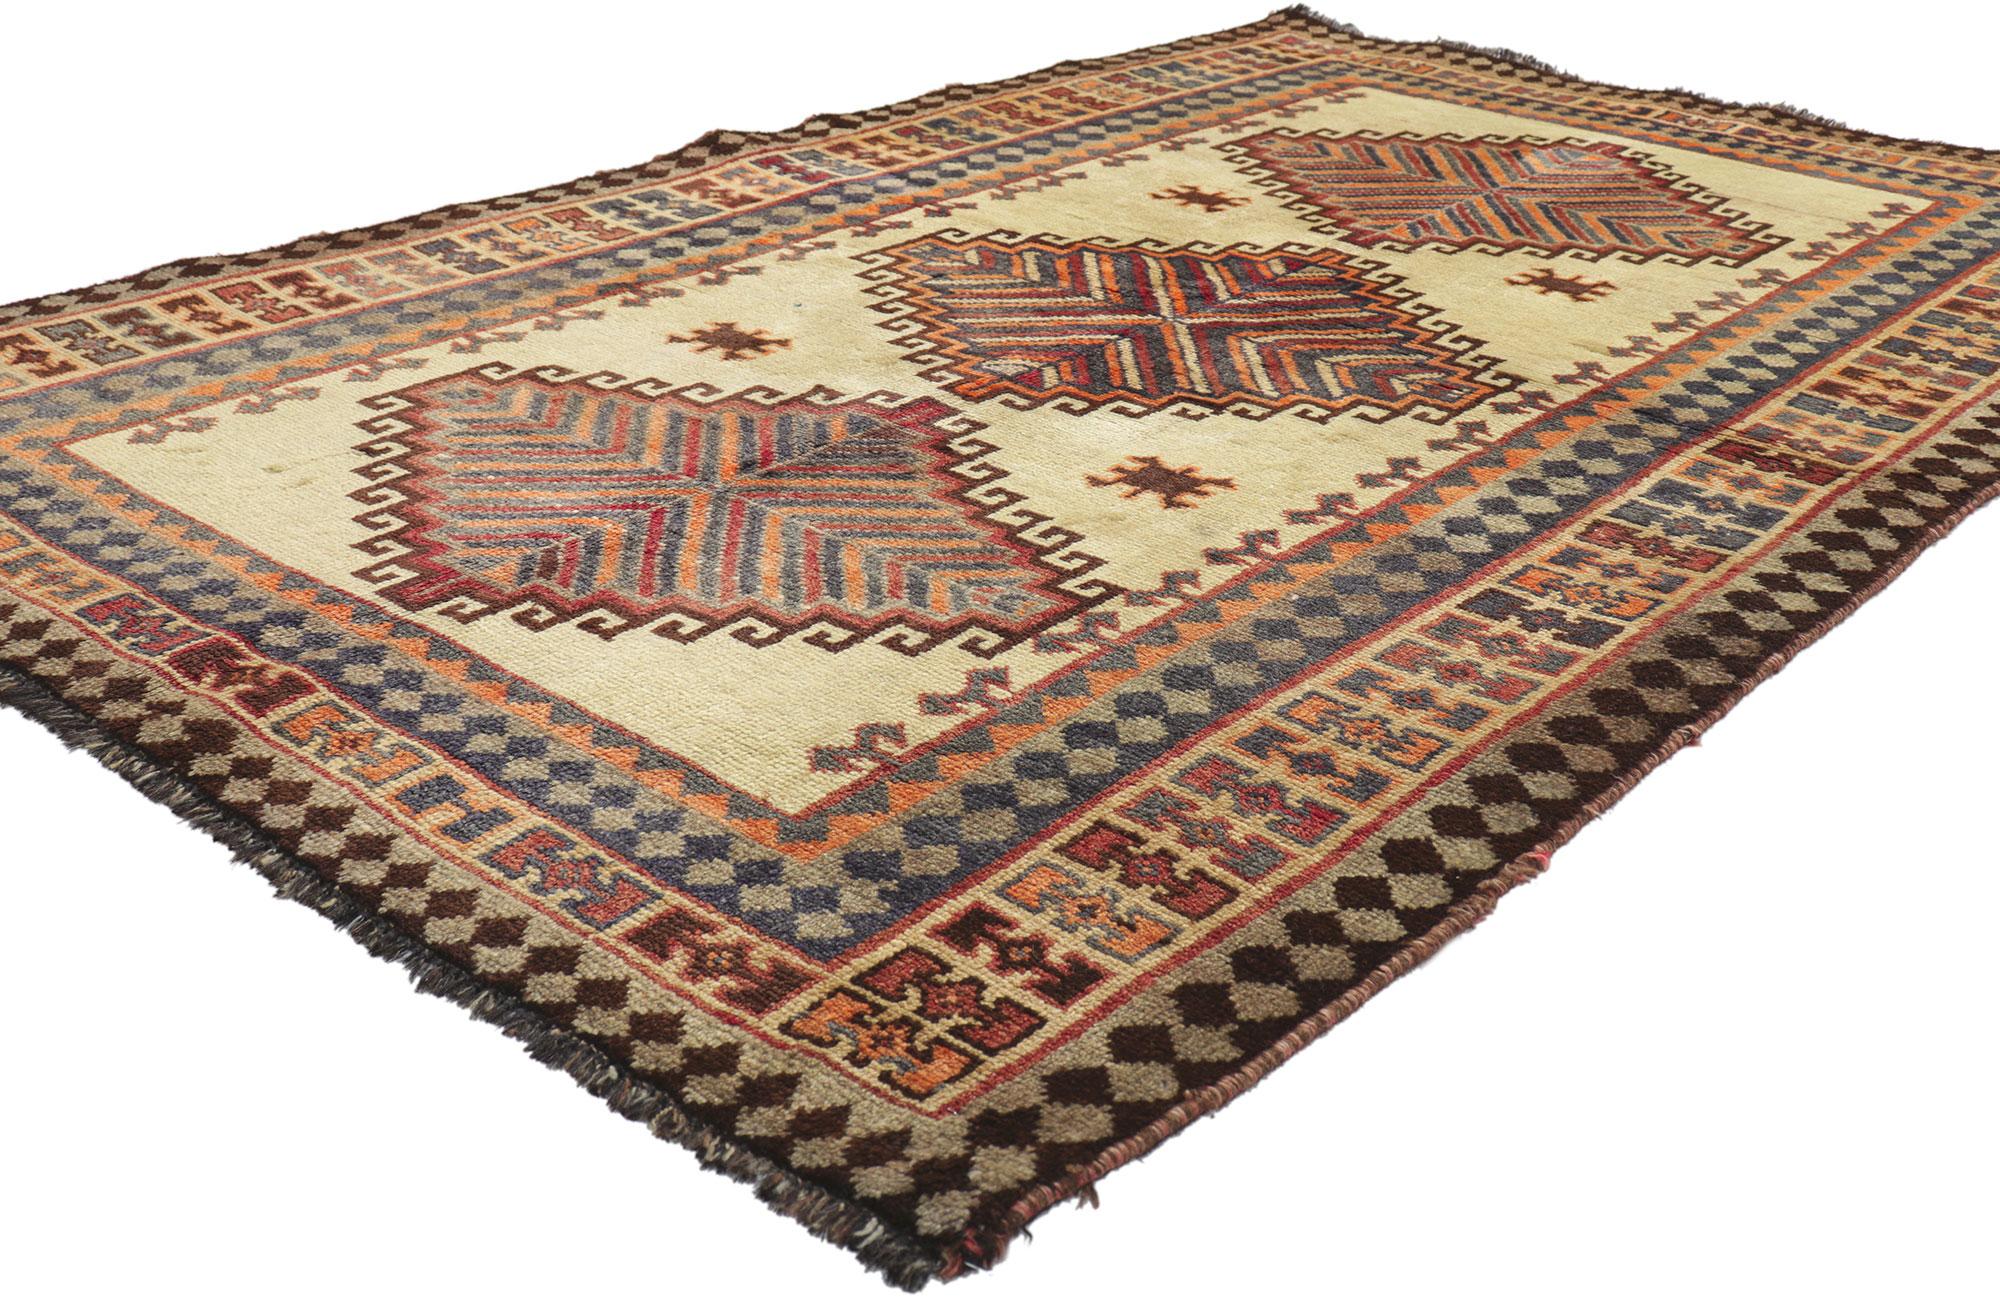 75070 Vintage Persian Shiraz Tribal Rug, 04’04 x 07’00.
Emanating nomadic charm with incredible detail and texture, this hand knotted wool vintage Persian Shiraz rug is a captivating vision of woven beauty. The striking geometric tribal design and